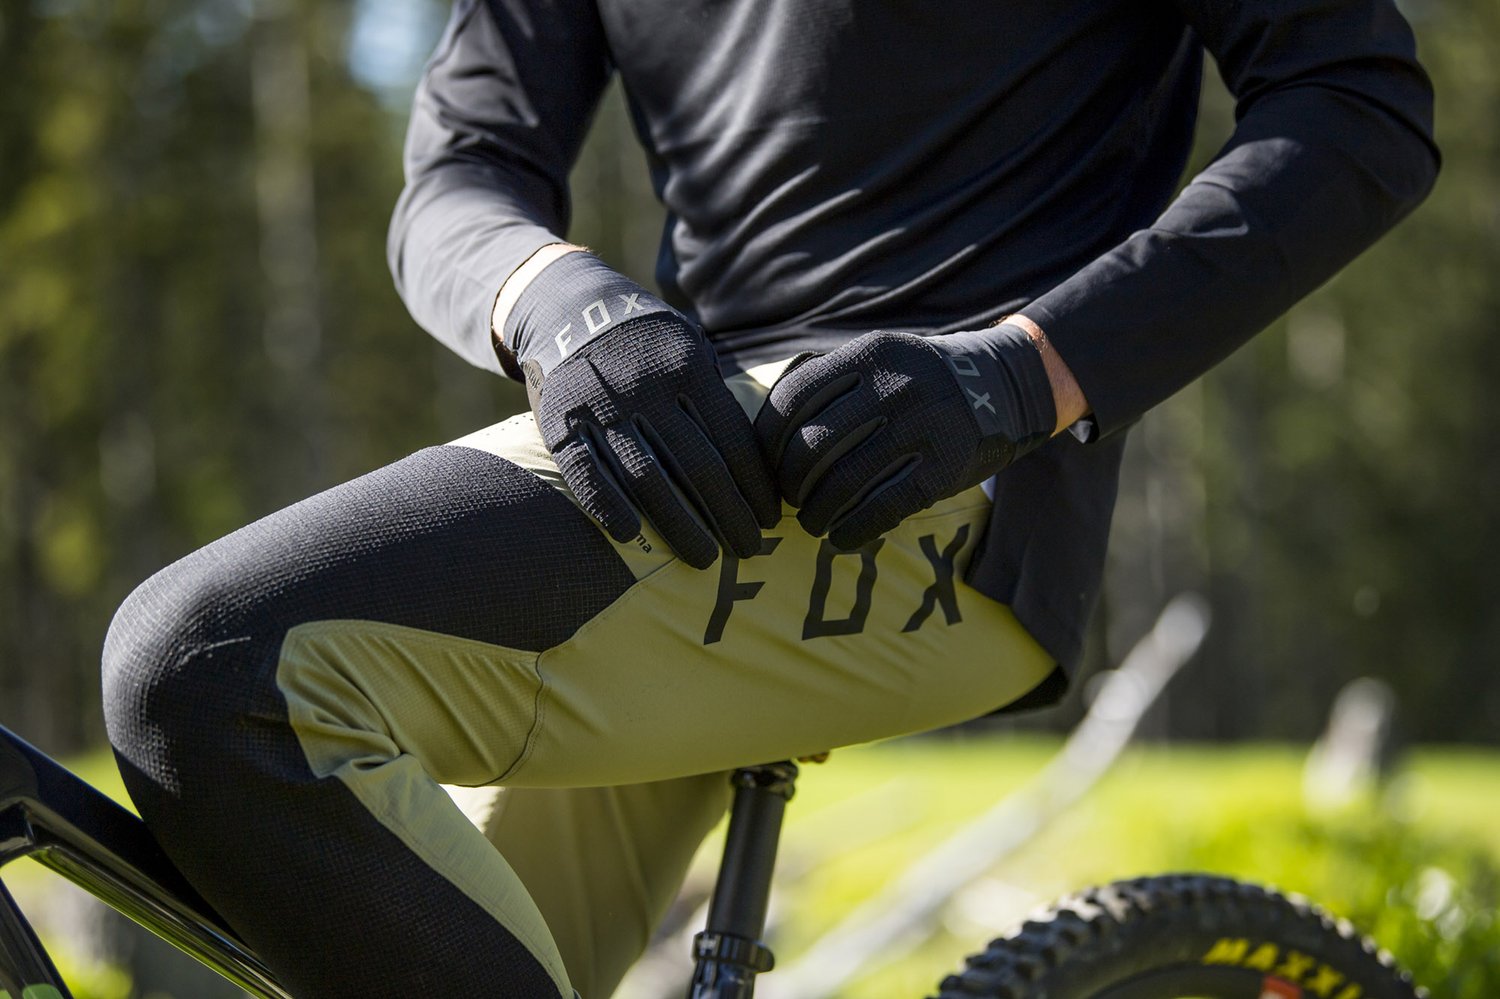 Fox Mountain Bike Clothing for Sale in UK, LIOS